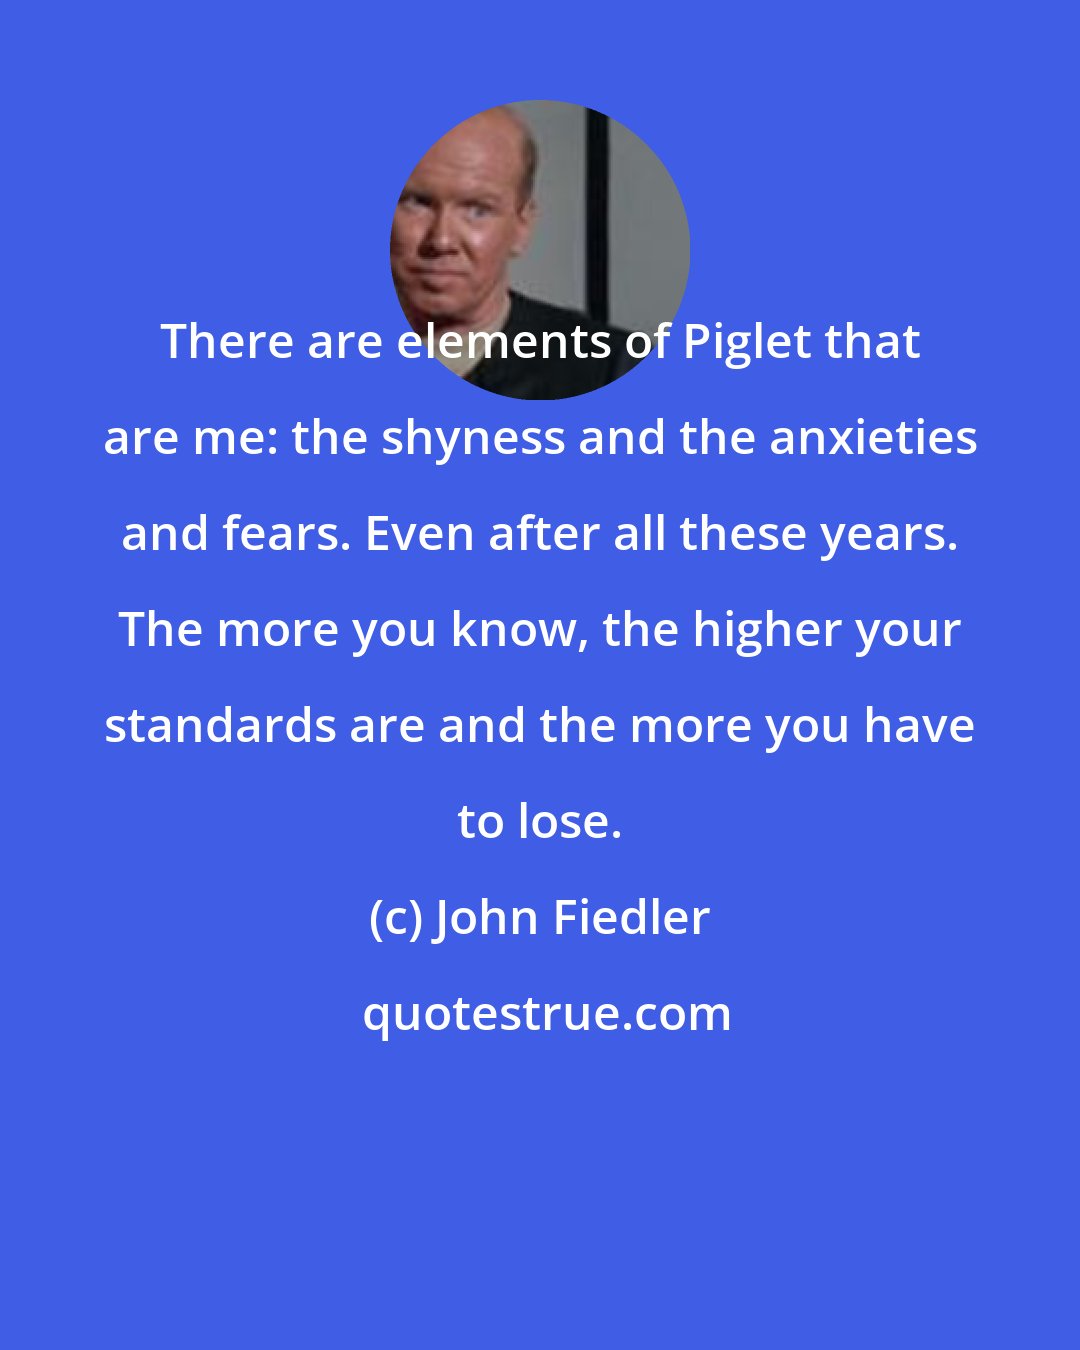 John Fiedler: There are elements of Piglet that are me: the shyness and the anxieties and fears. Even after all these years. The more you know, the higher your standards are and the more you have to lose.